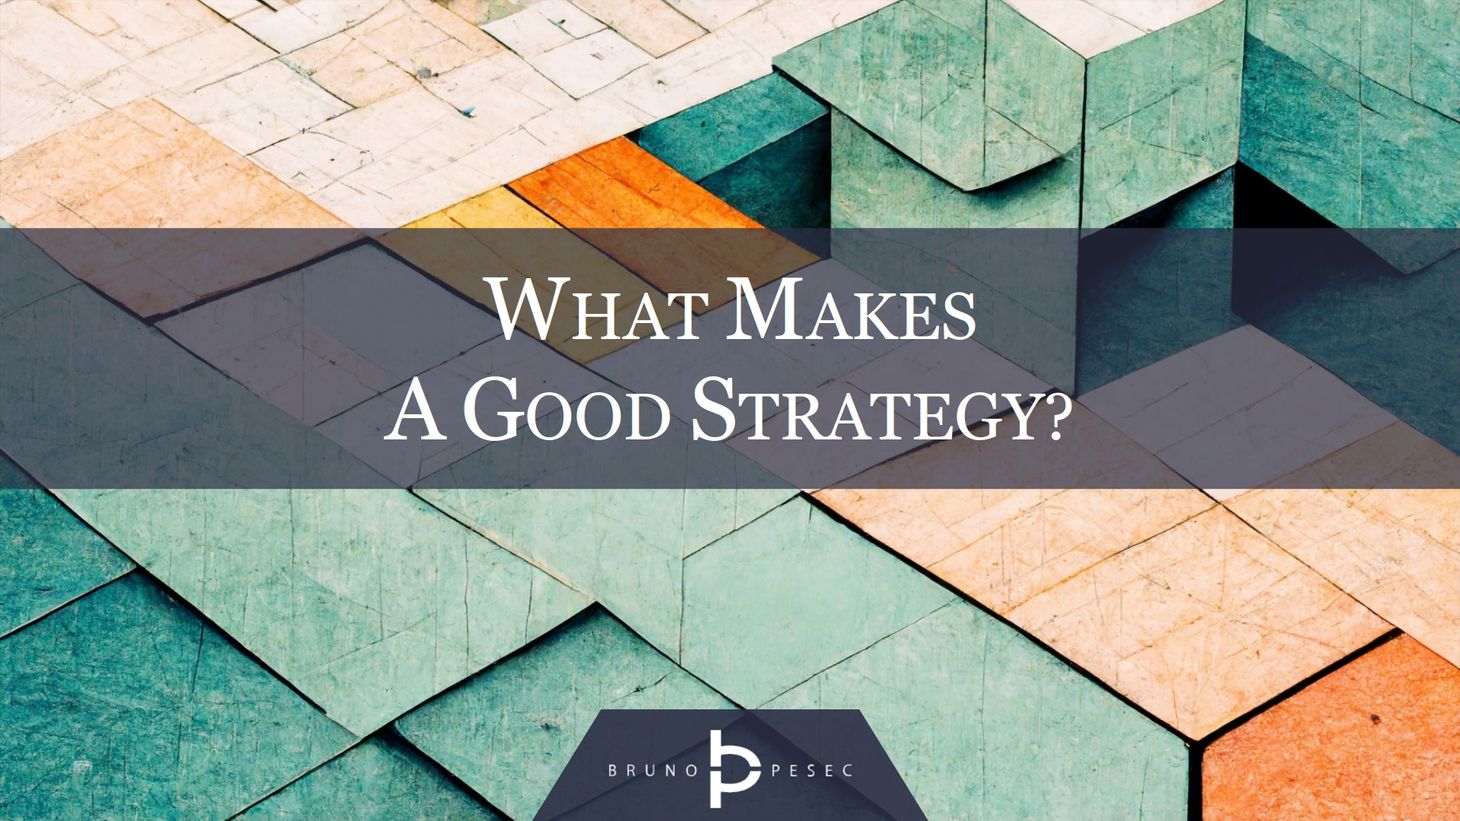 What makes a good strategy?